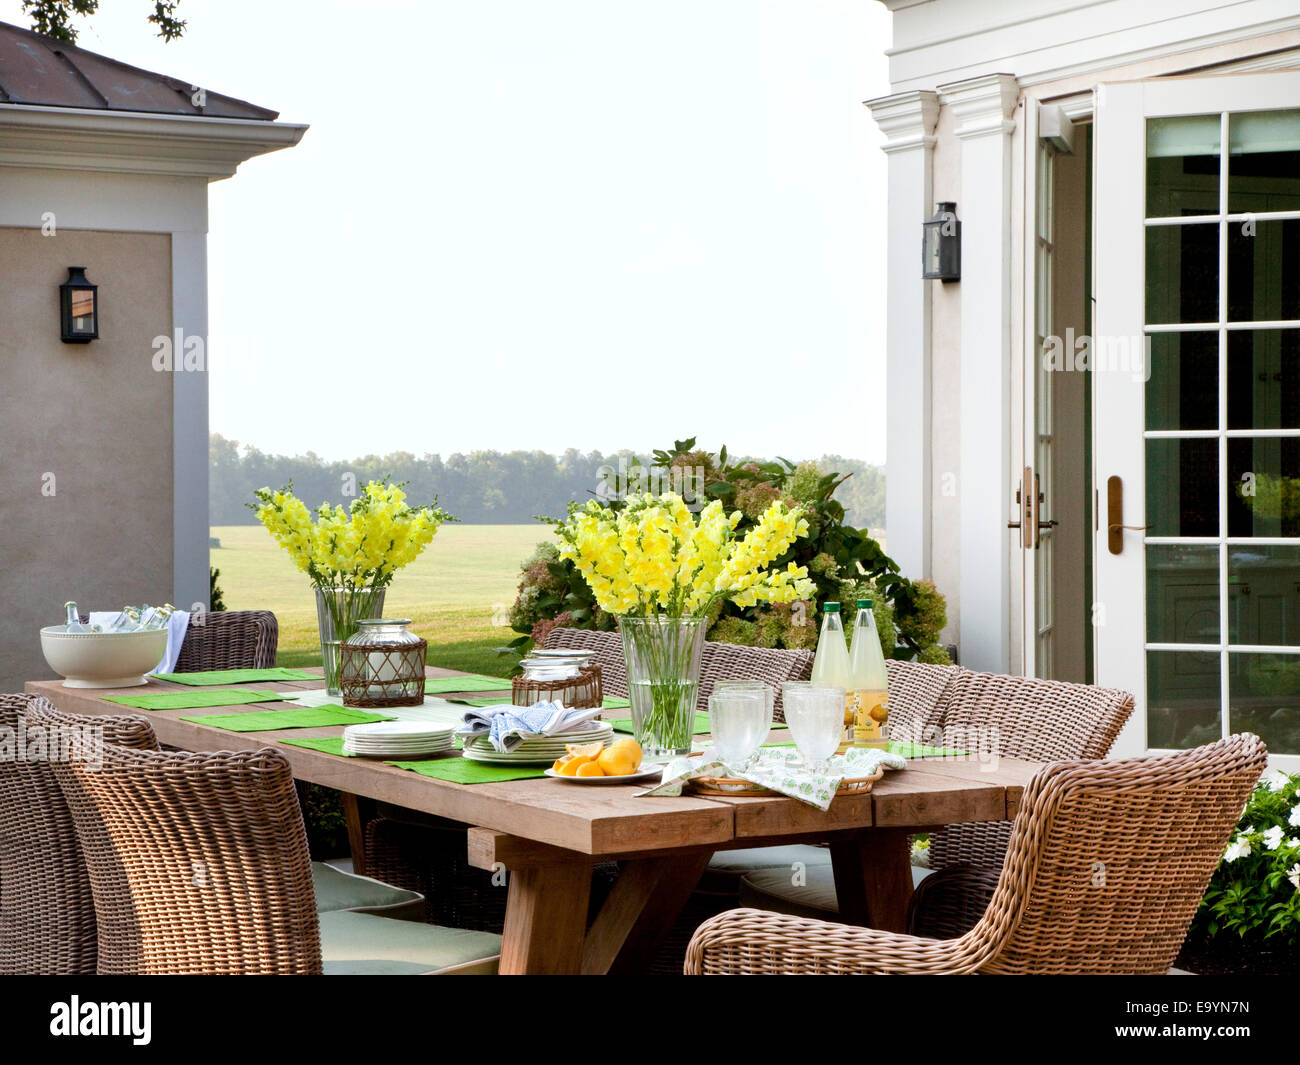 setting a table for outdoor dining in the countryside. Stock Photo